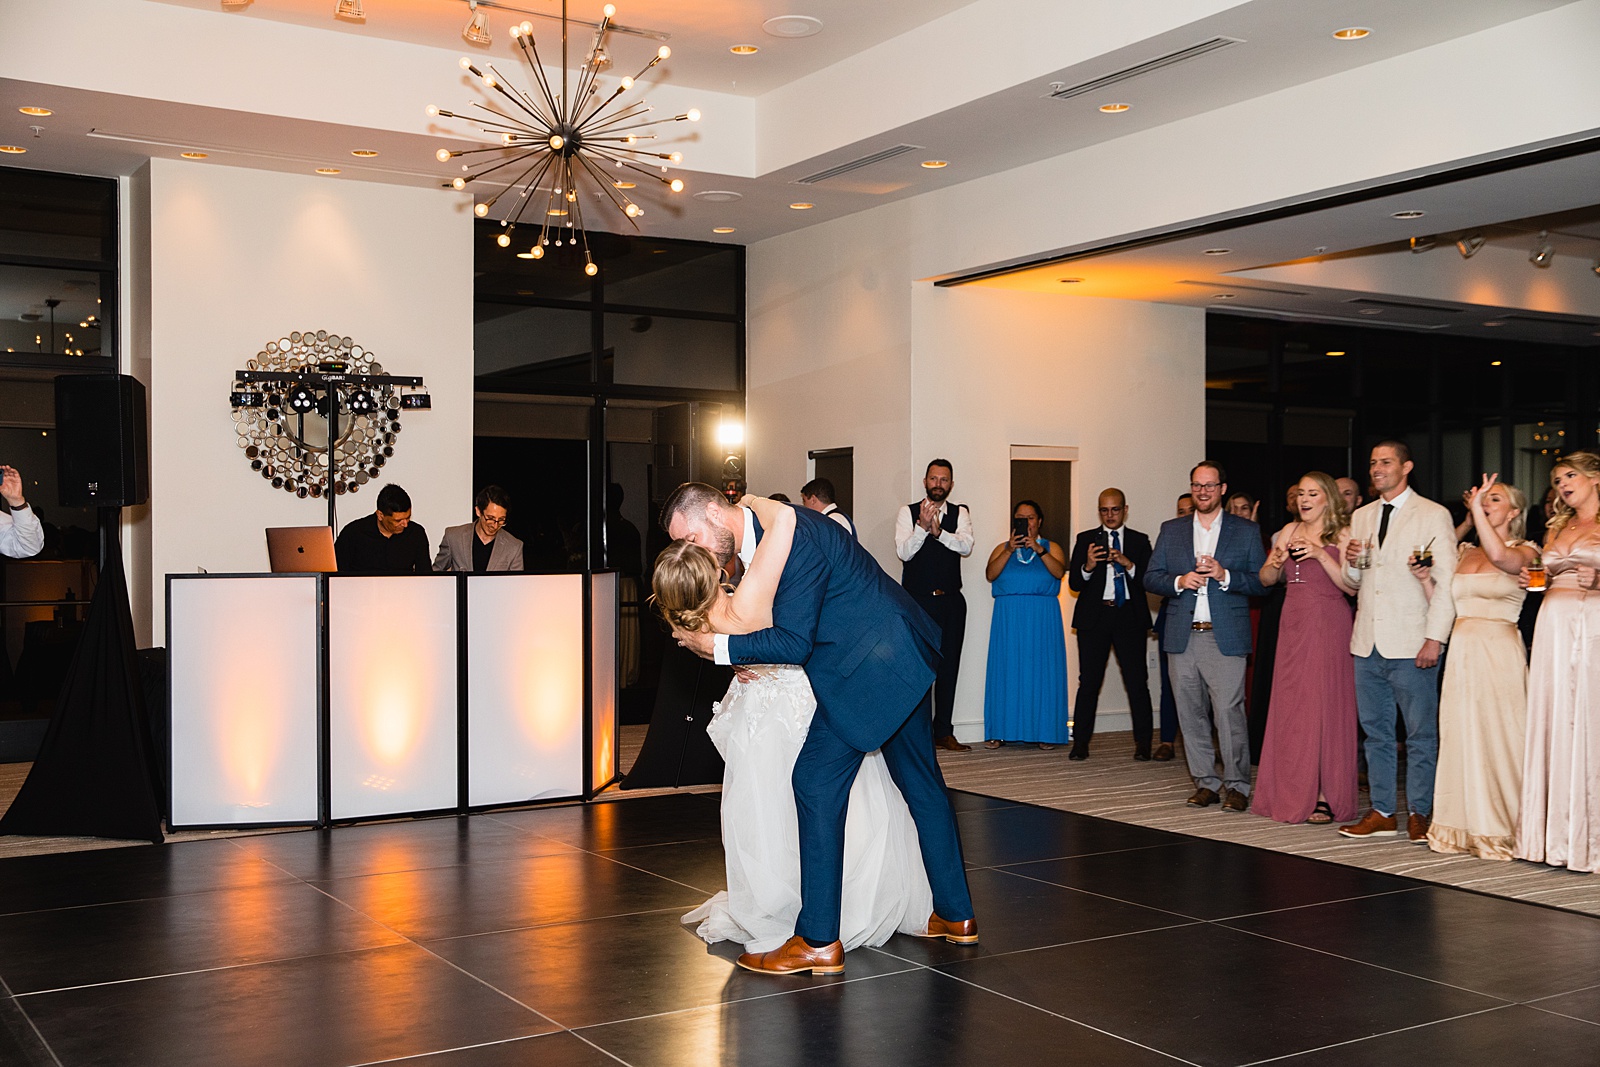 Bride & Groom sharing first dance at their Sanctuary at Camelback wedding reception by Arizona wedding photographer Juniper and Co Photography.